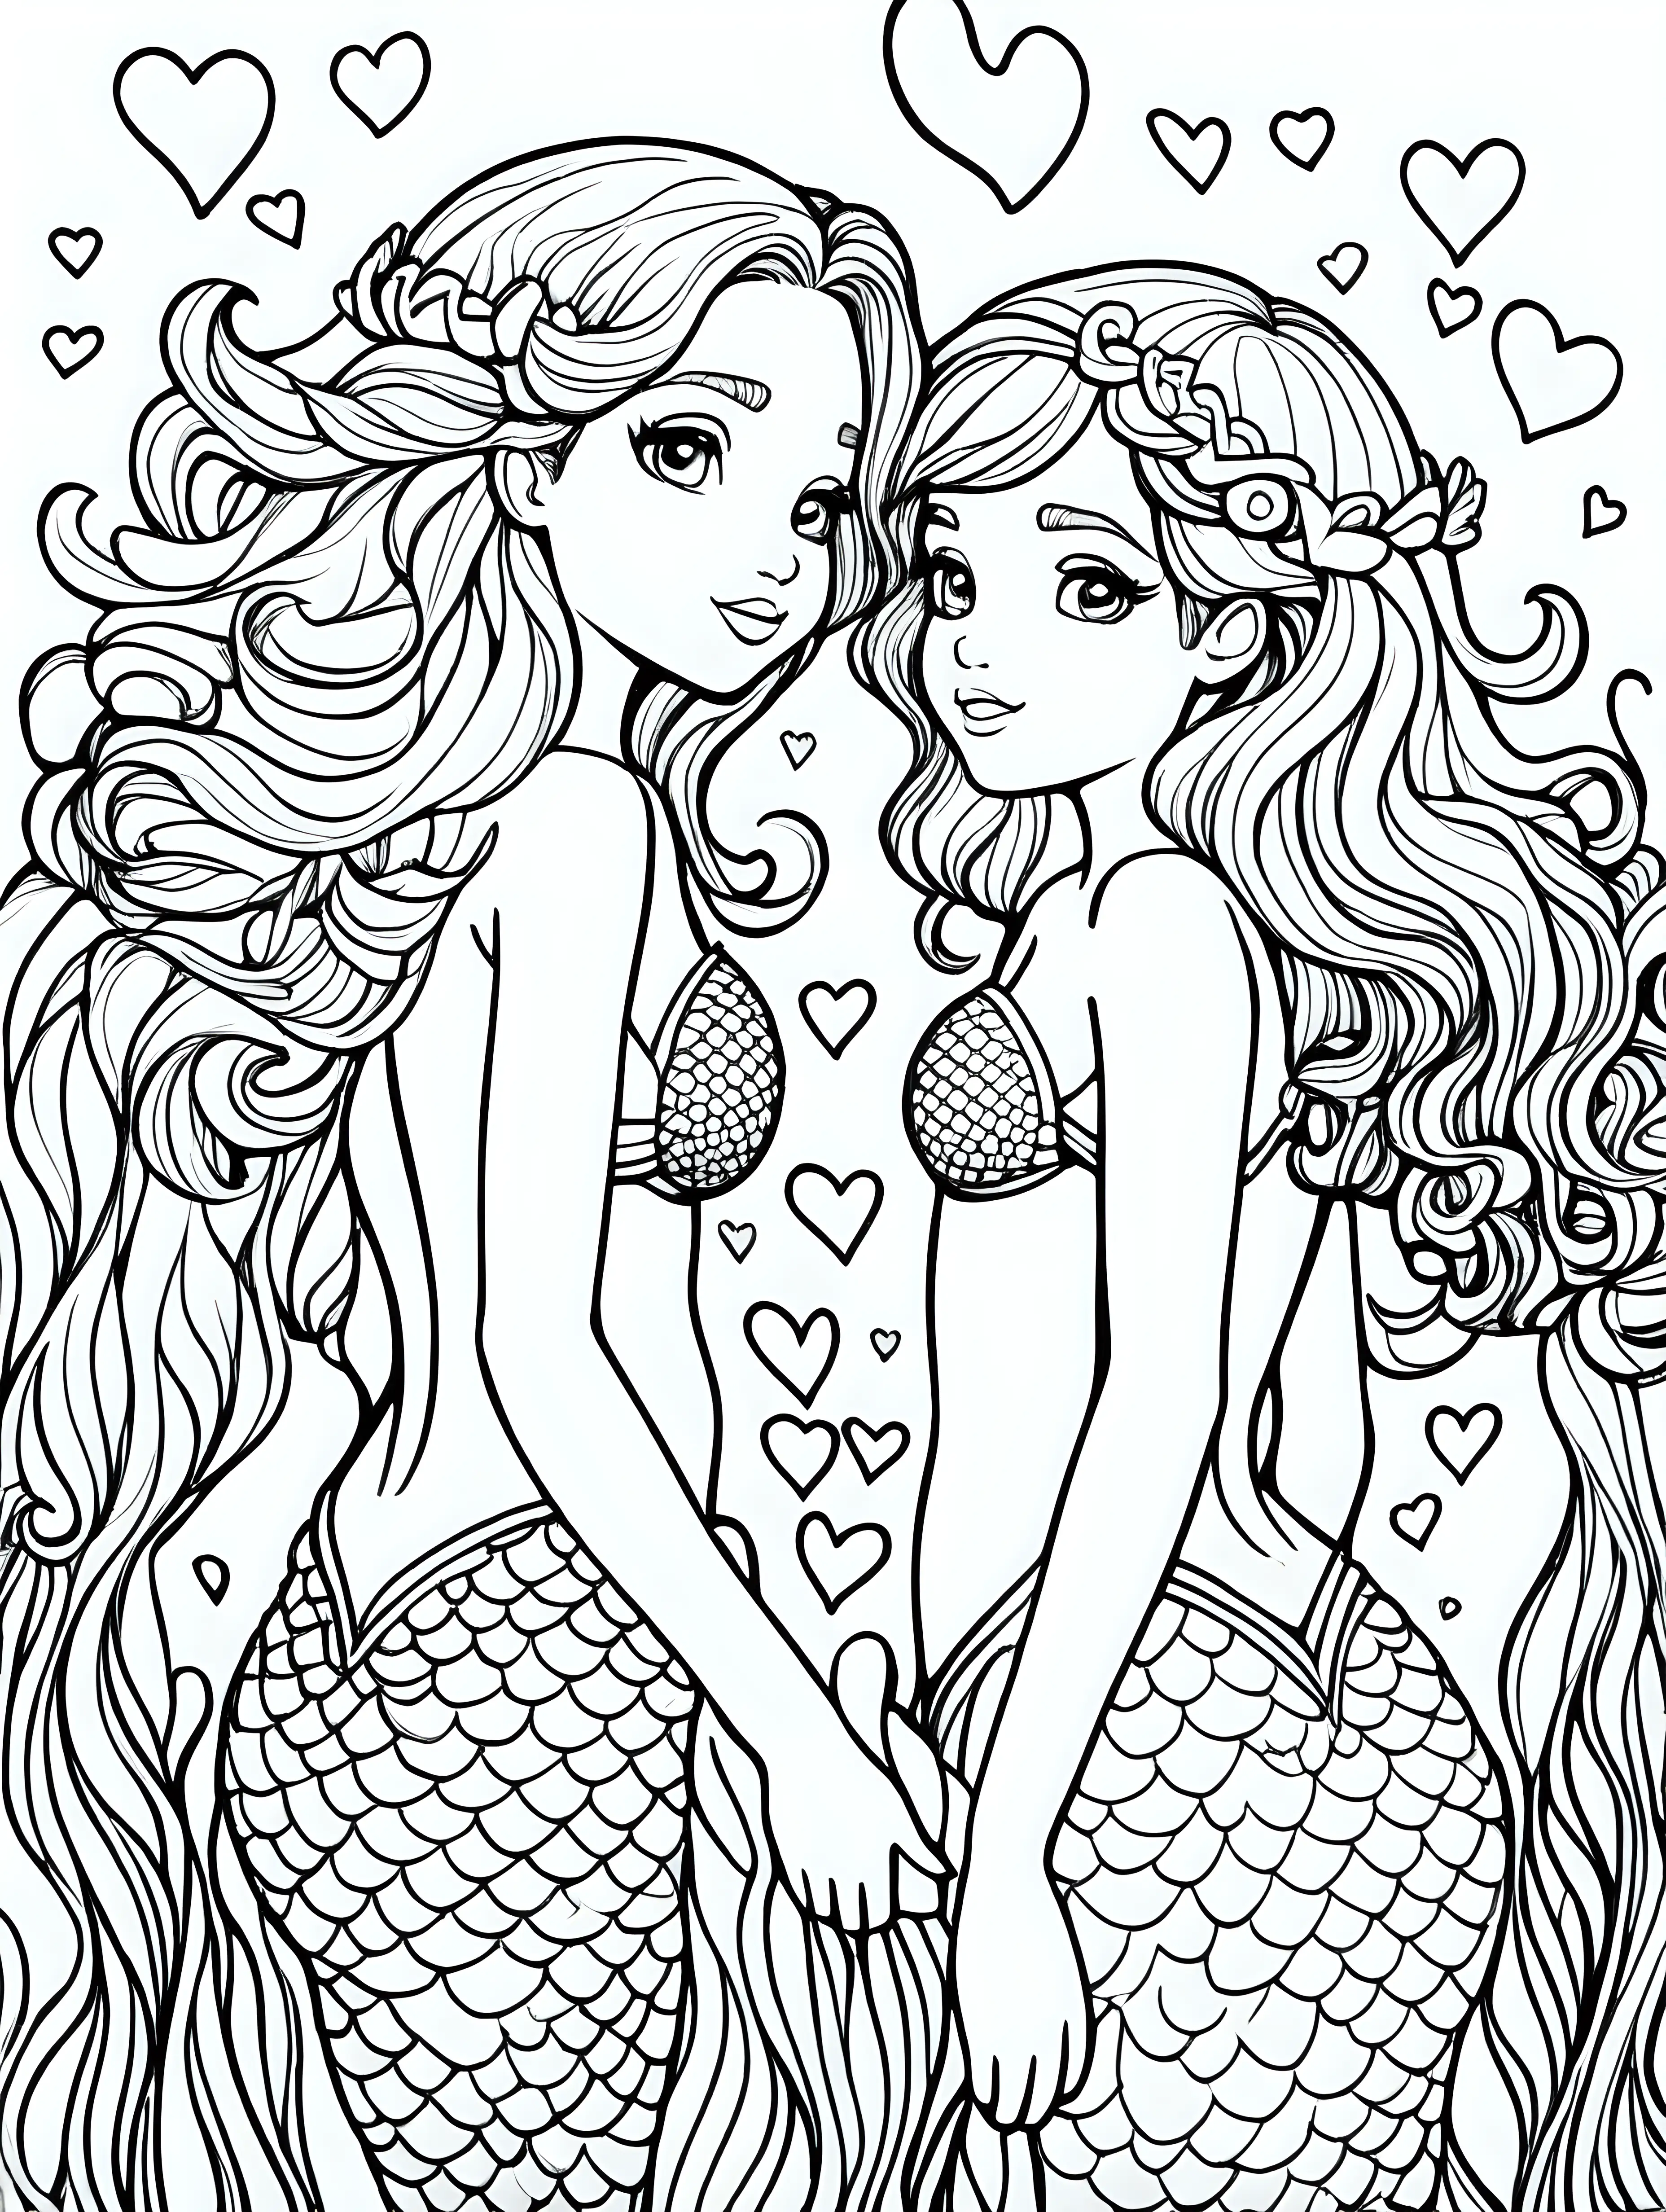 Adorable Mermaids Coloring Page with Heart Surroundings